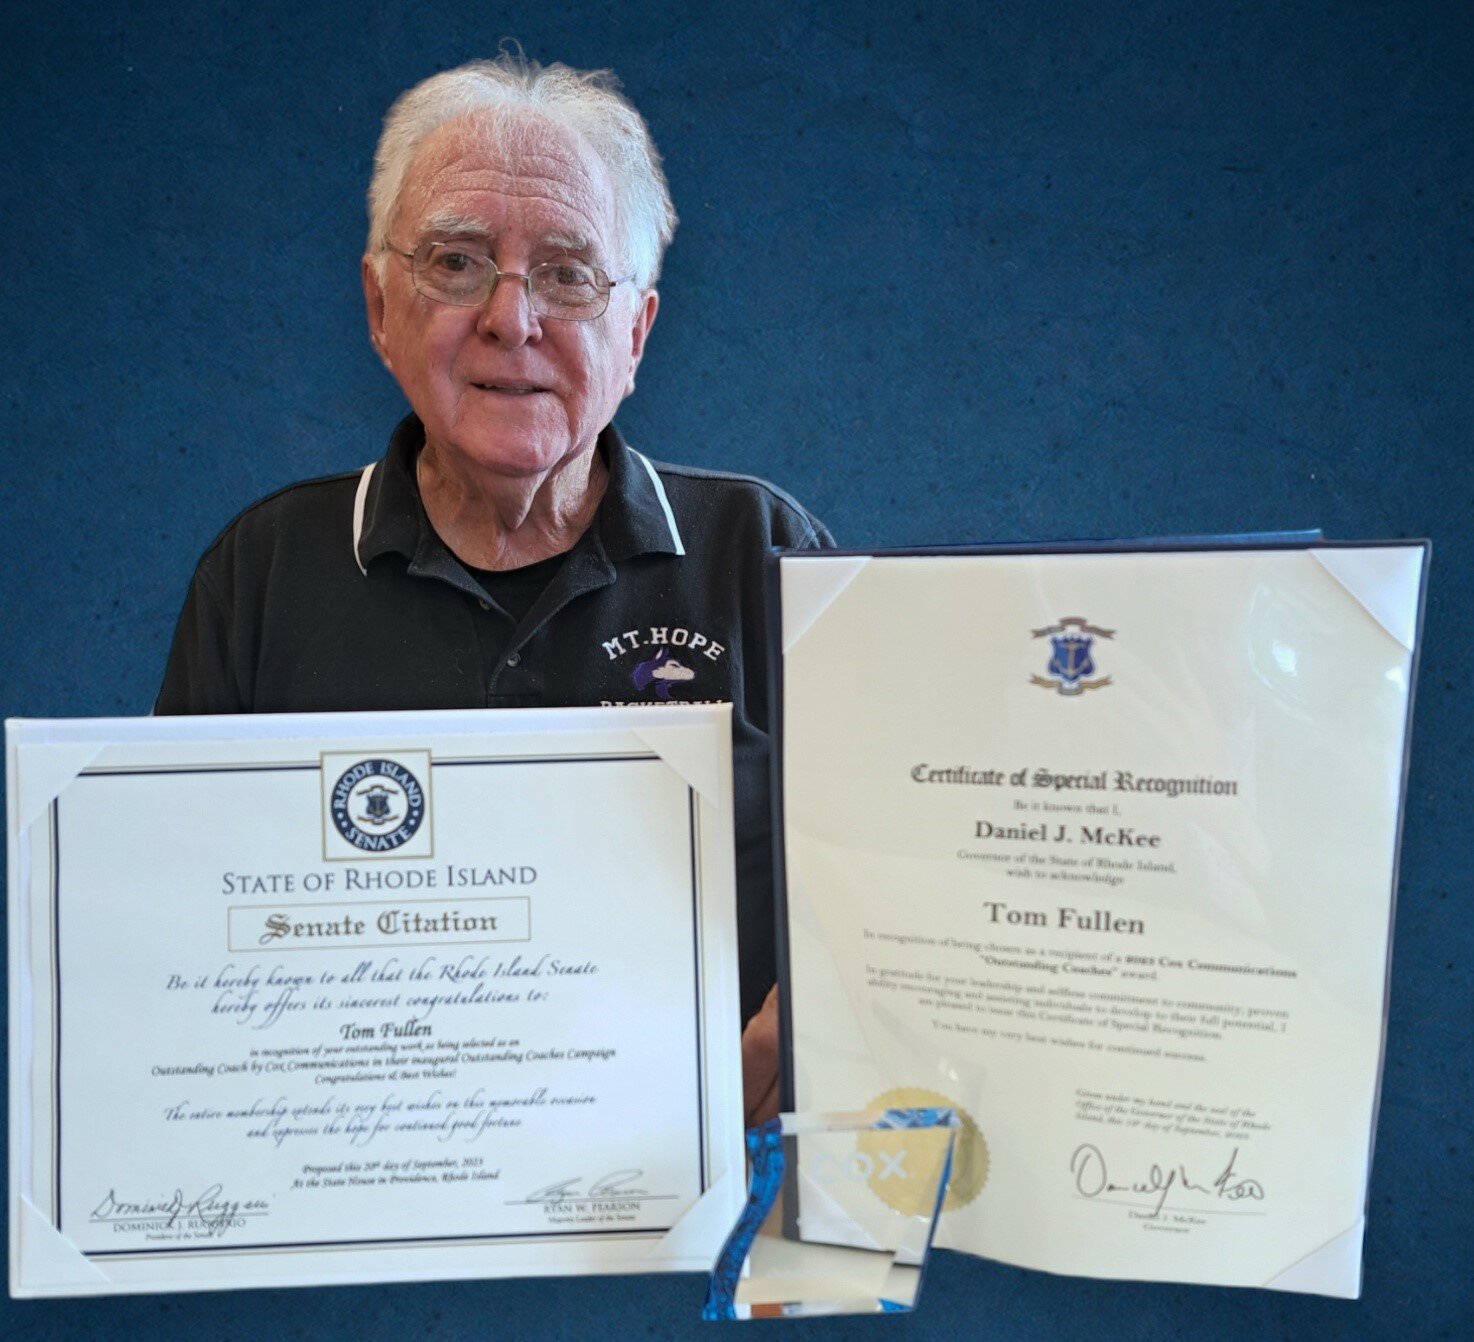 Mt. Hope High School's Tom Fullen poses with his Outstanding Coaches Award citations from the State of Rhode Island.